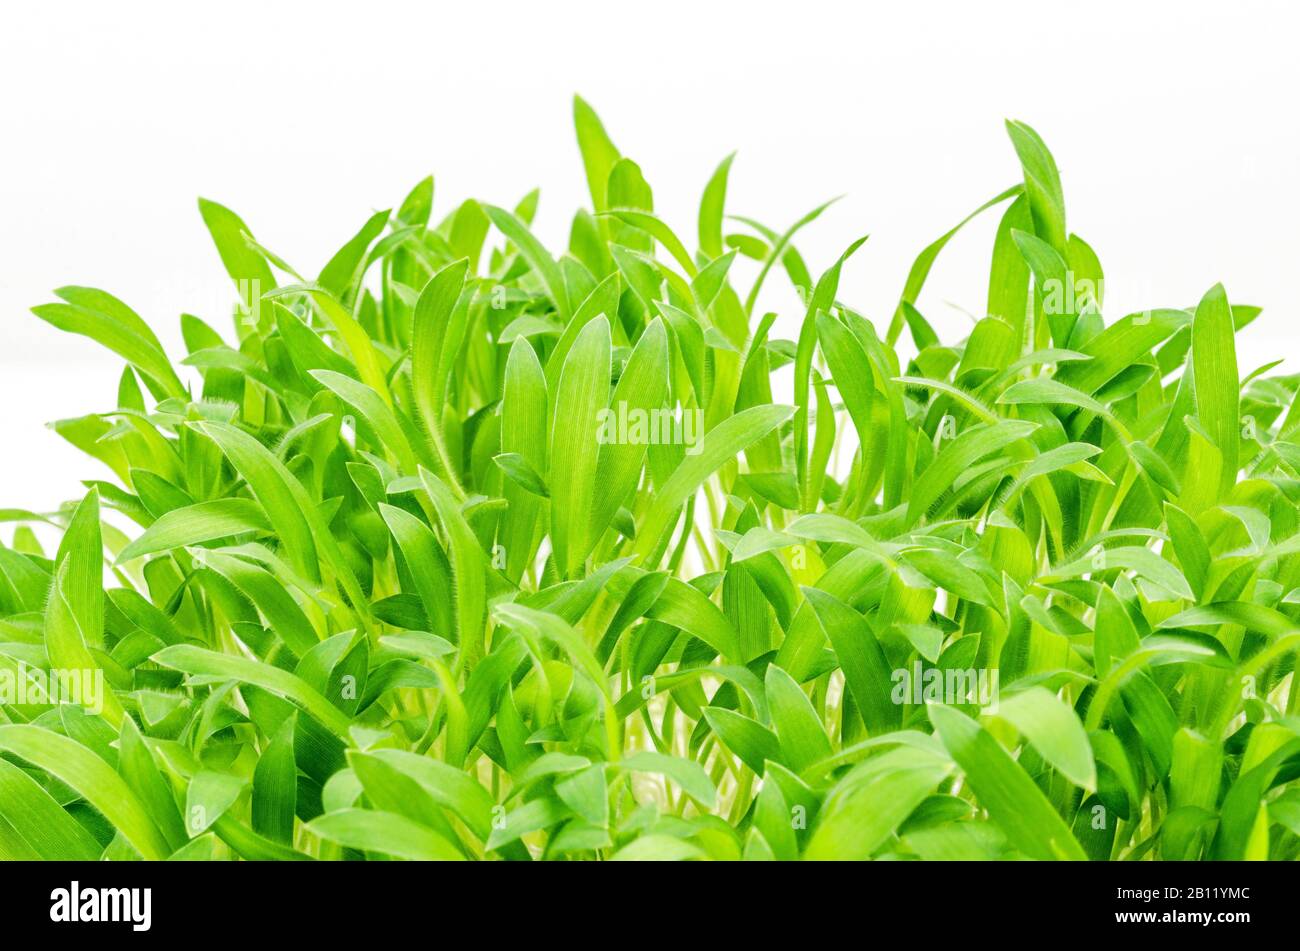 Brown millet microgreen, closeup, macro food photo. Shoots of Panicum miliaceum, also called proso millet. Sprouts, green seedlings, young plants. Stock Photo